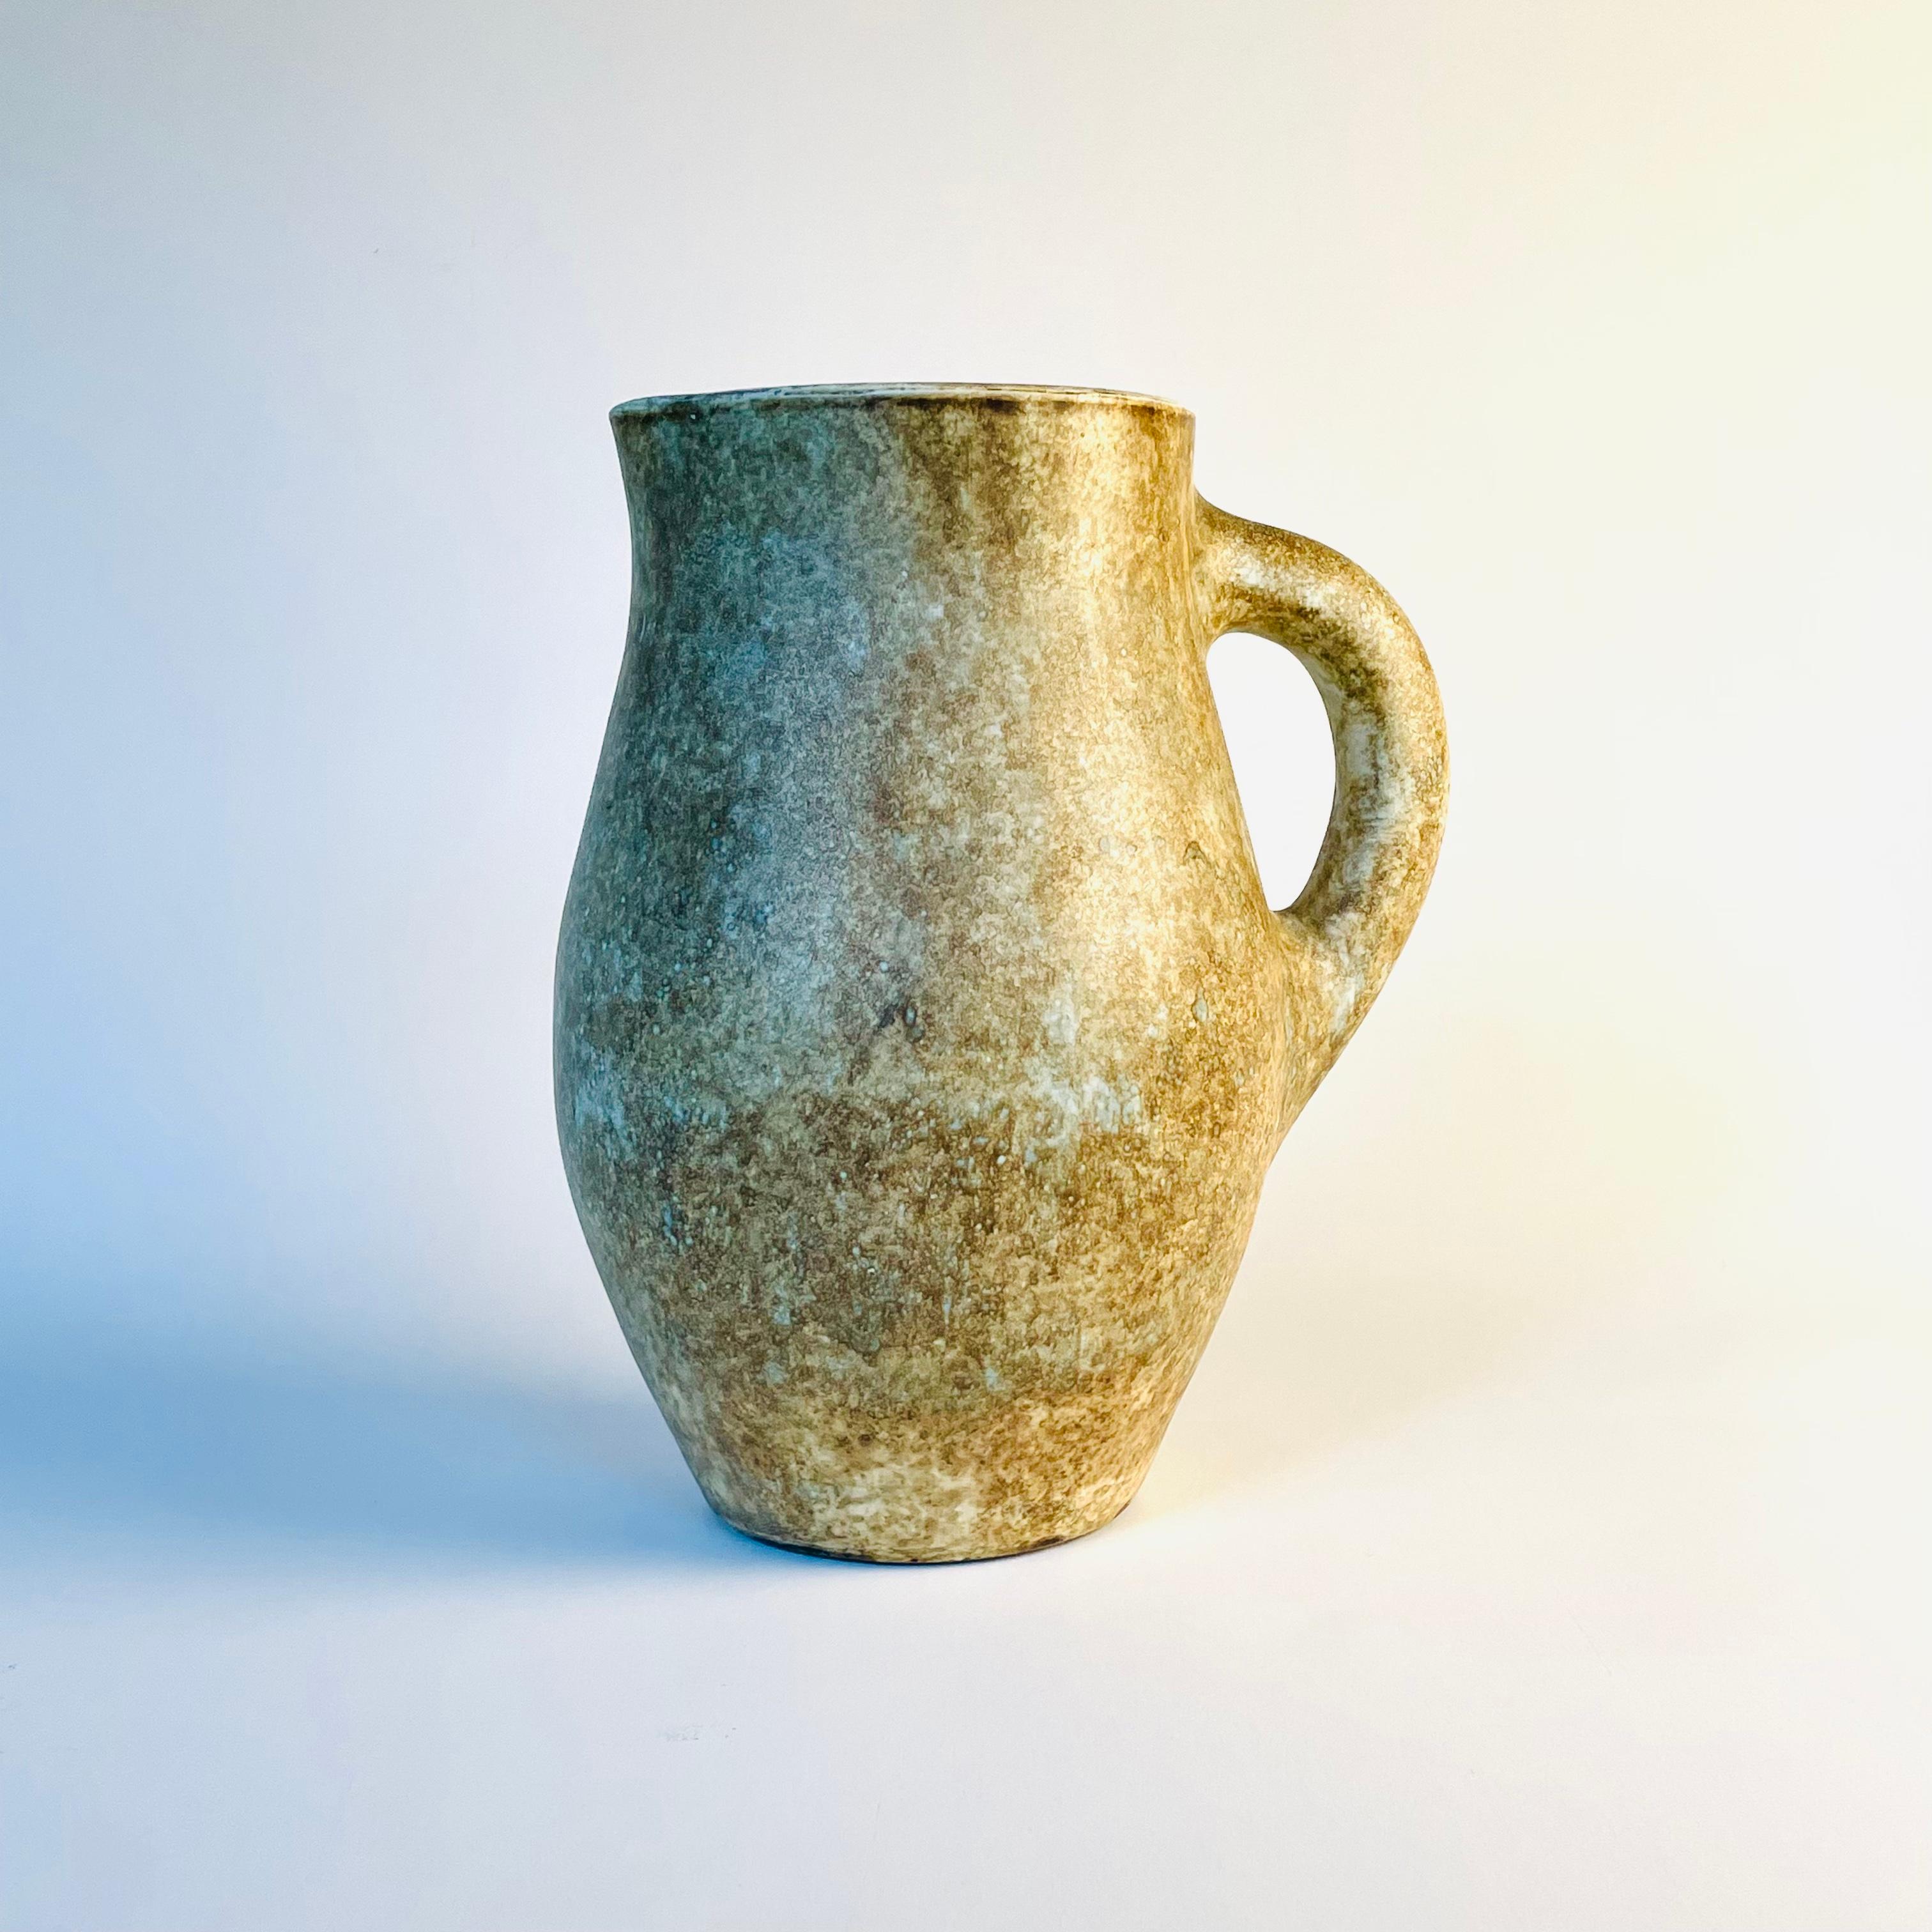 French Ceramic pitcher by Jacques and Michelle Serre, Les 2 potiers, circa 1950